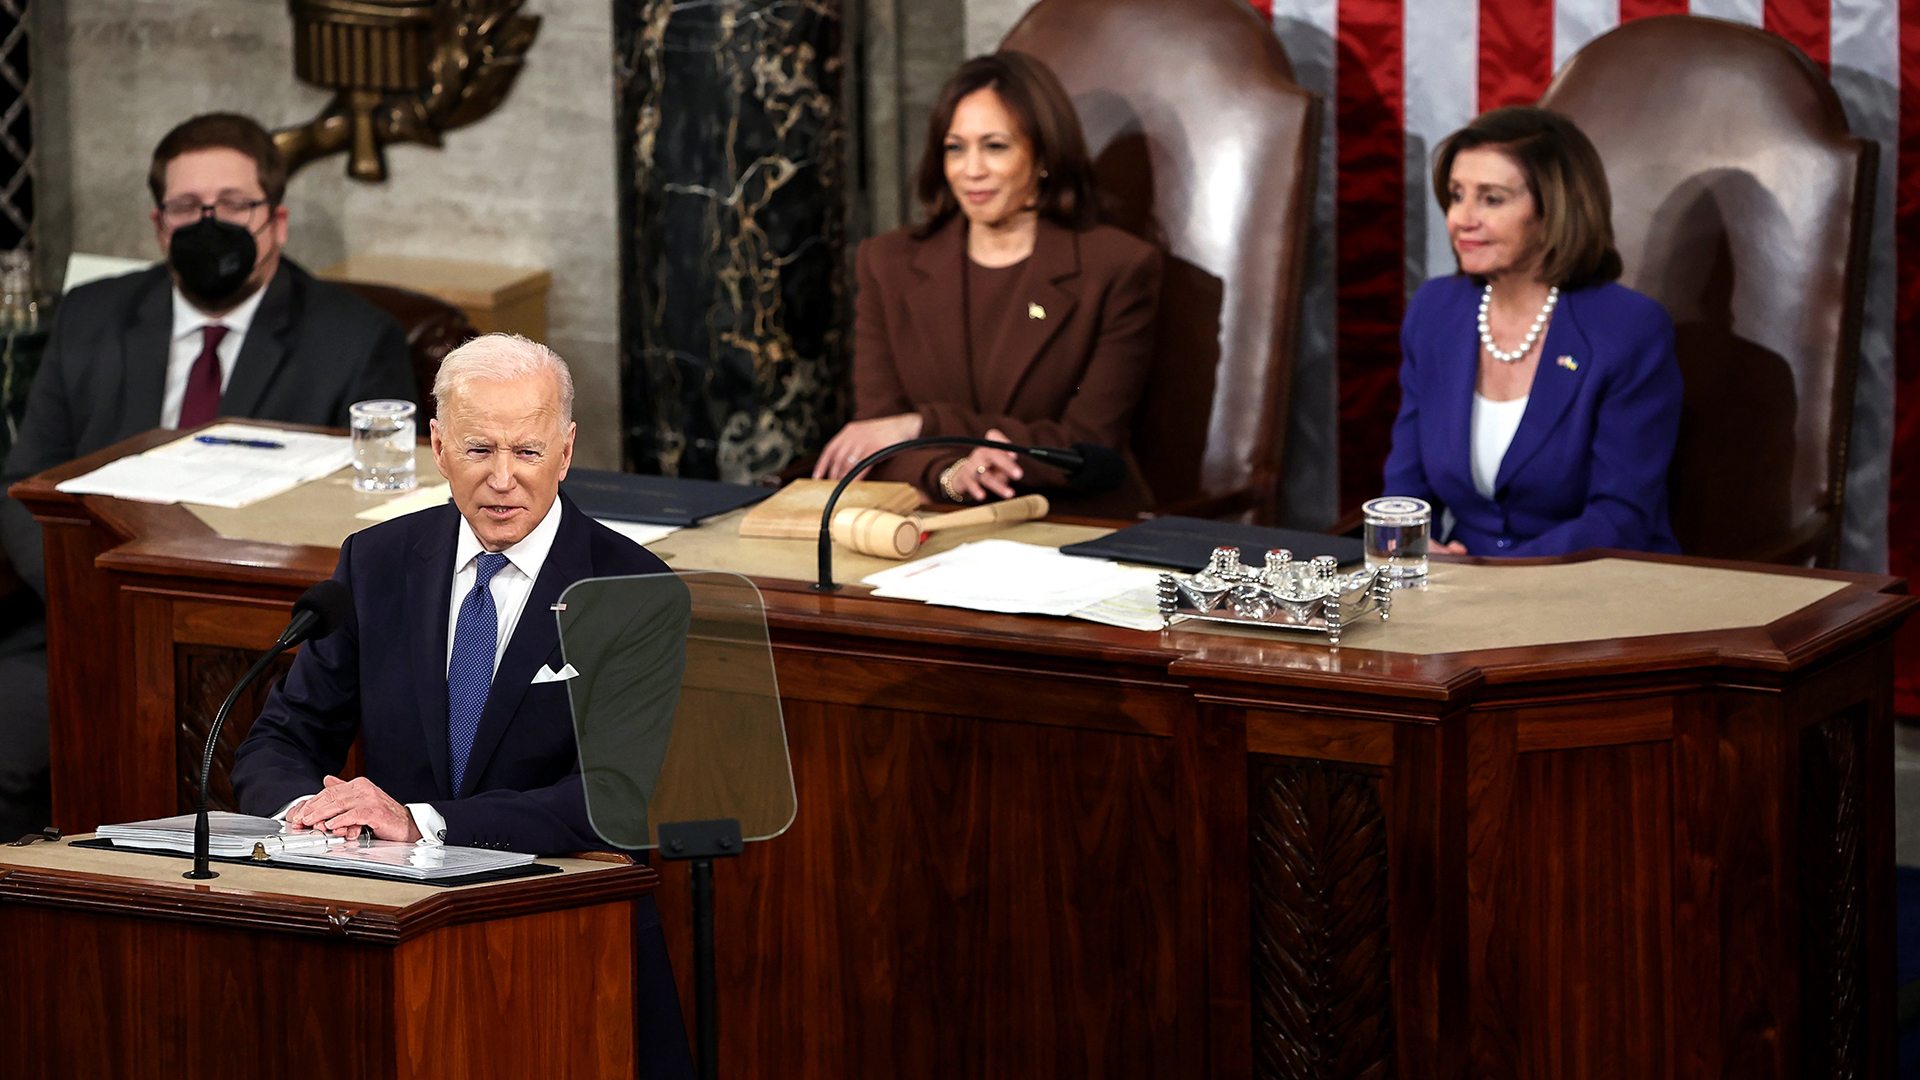 The hits Joe Biden didn't take during his State of the Union address thumbnail